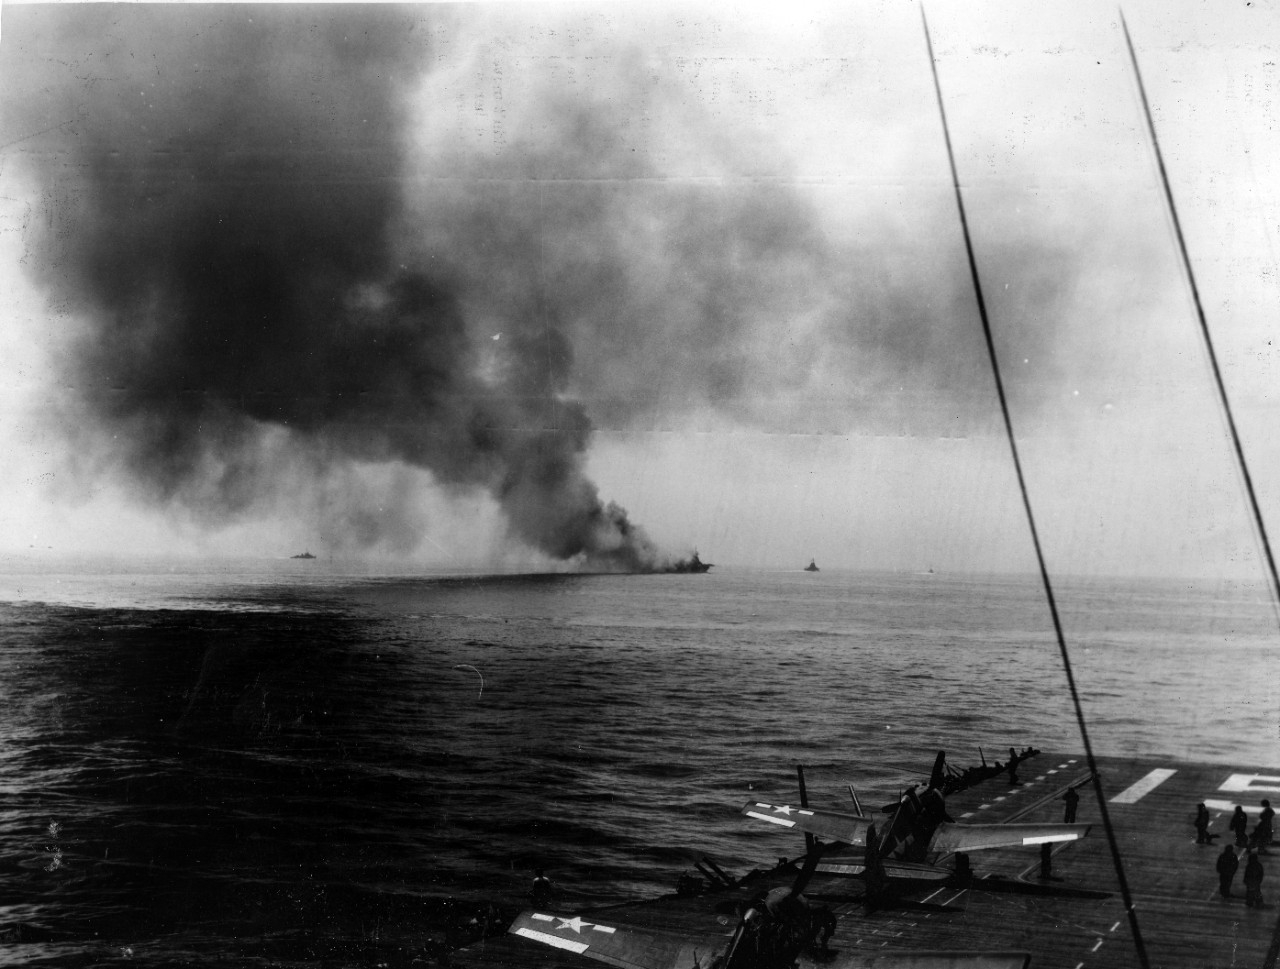 S-100-H.001 USS Bunker Hill (CV 17) burning after kamikaze attack - 11 May 1945